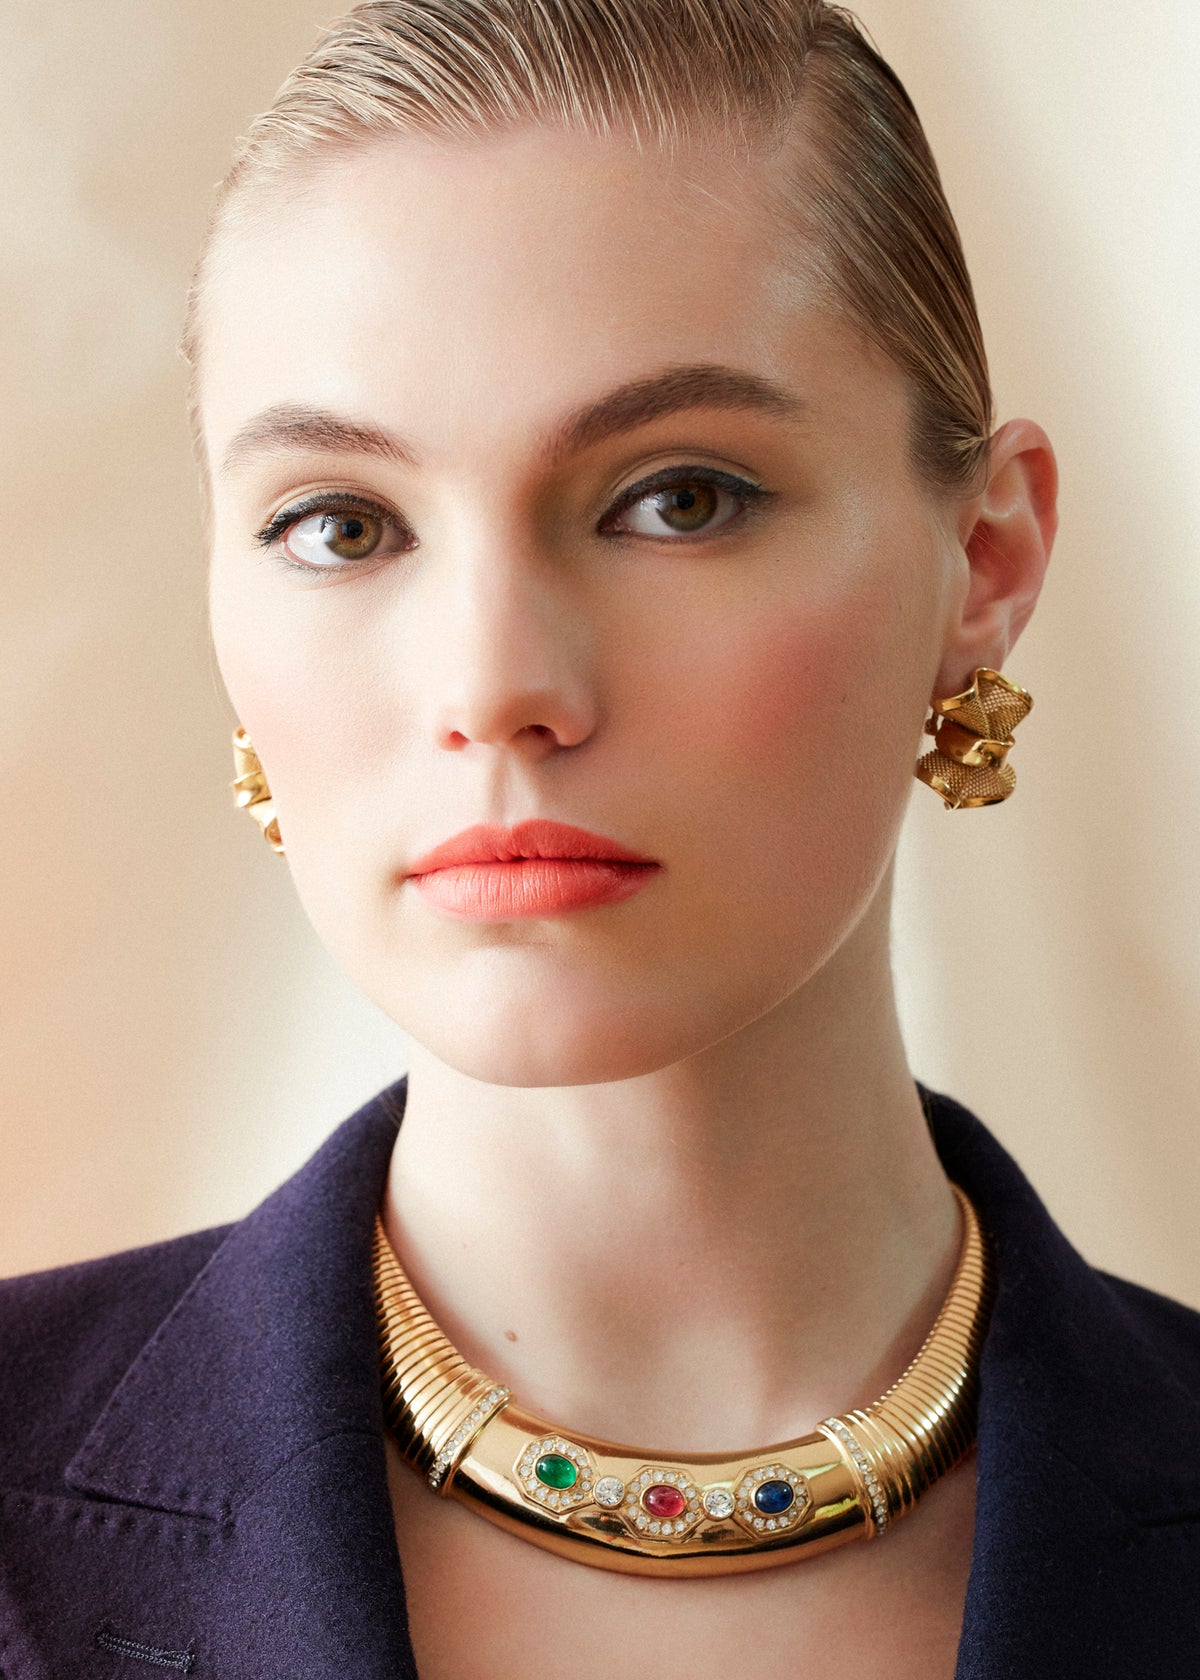 Givenchy Gold Mesh Bow Shaped Clip Earrings